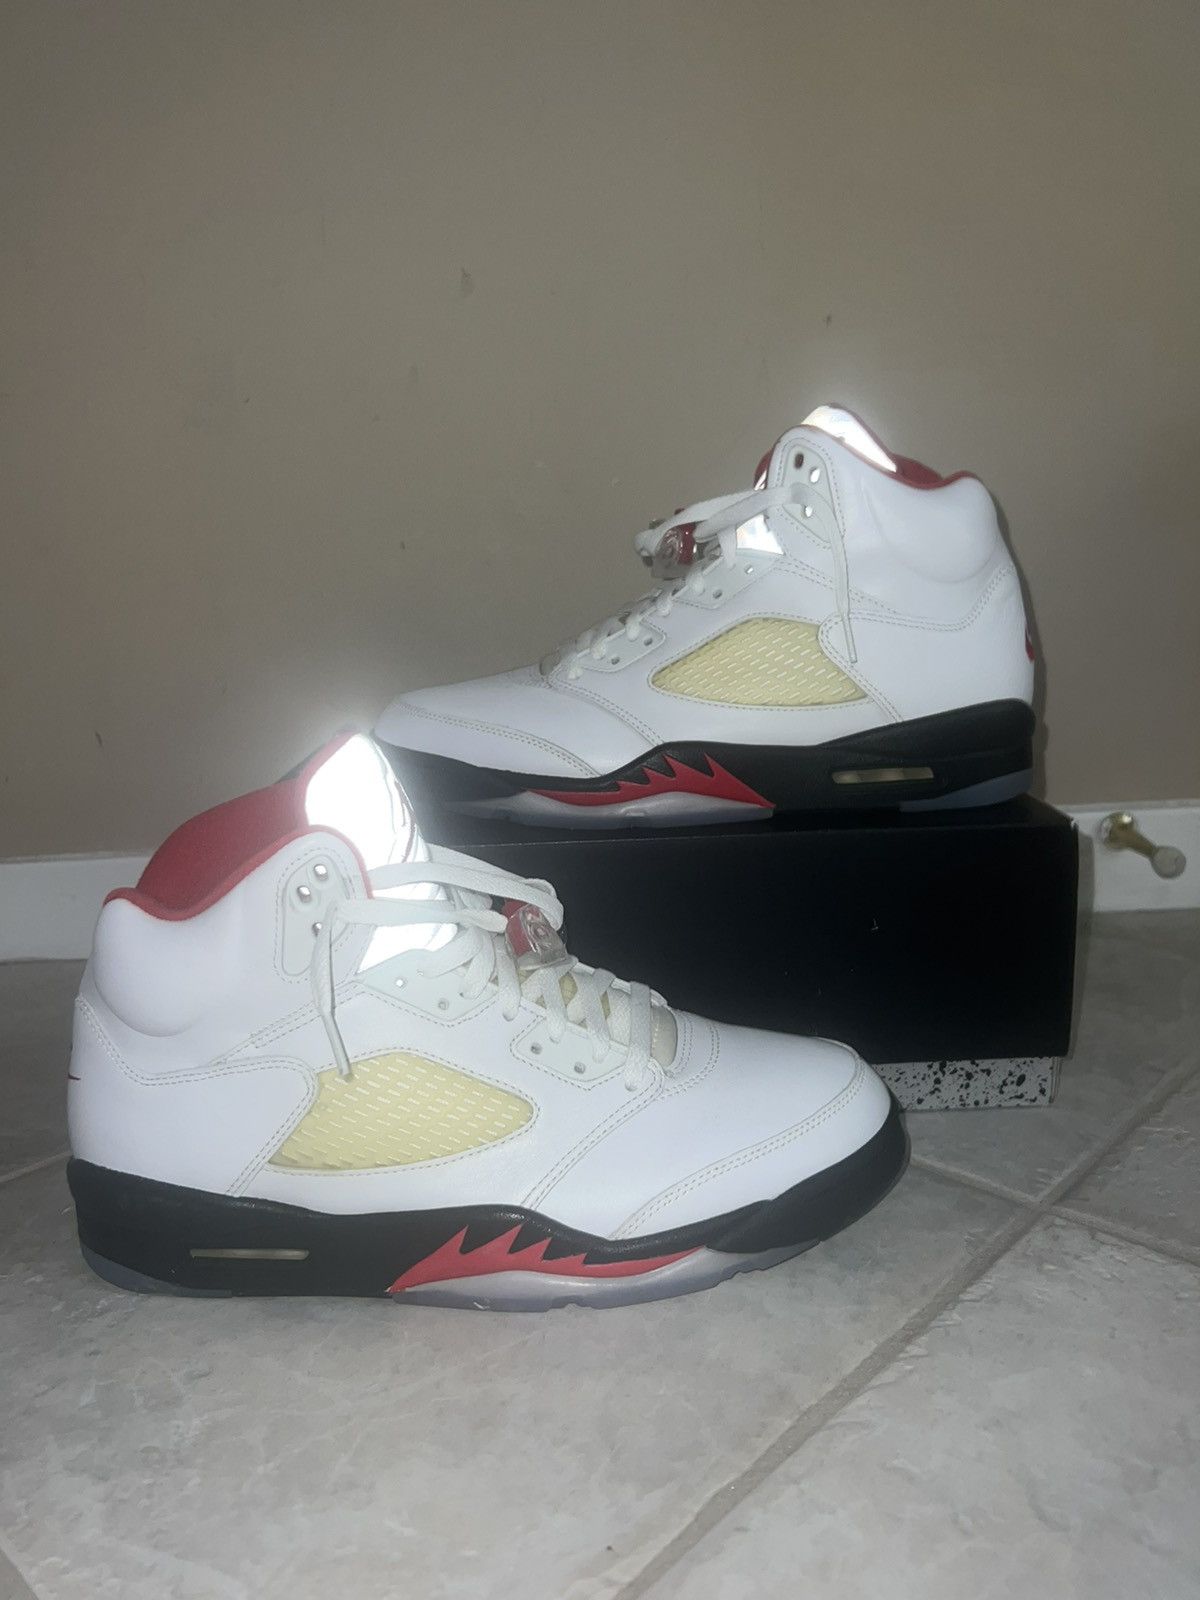 Pre-owned Jordan Nike Jordan 5 Retro Fire Red Silver Tongue 2020 Size 11 Shoes In White